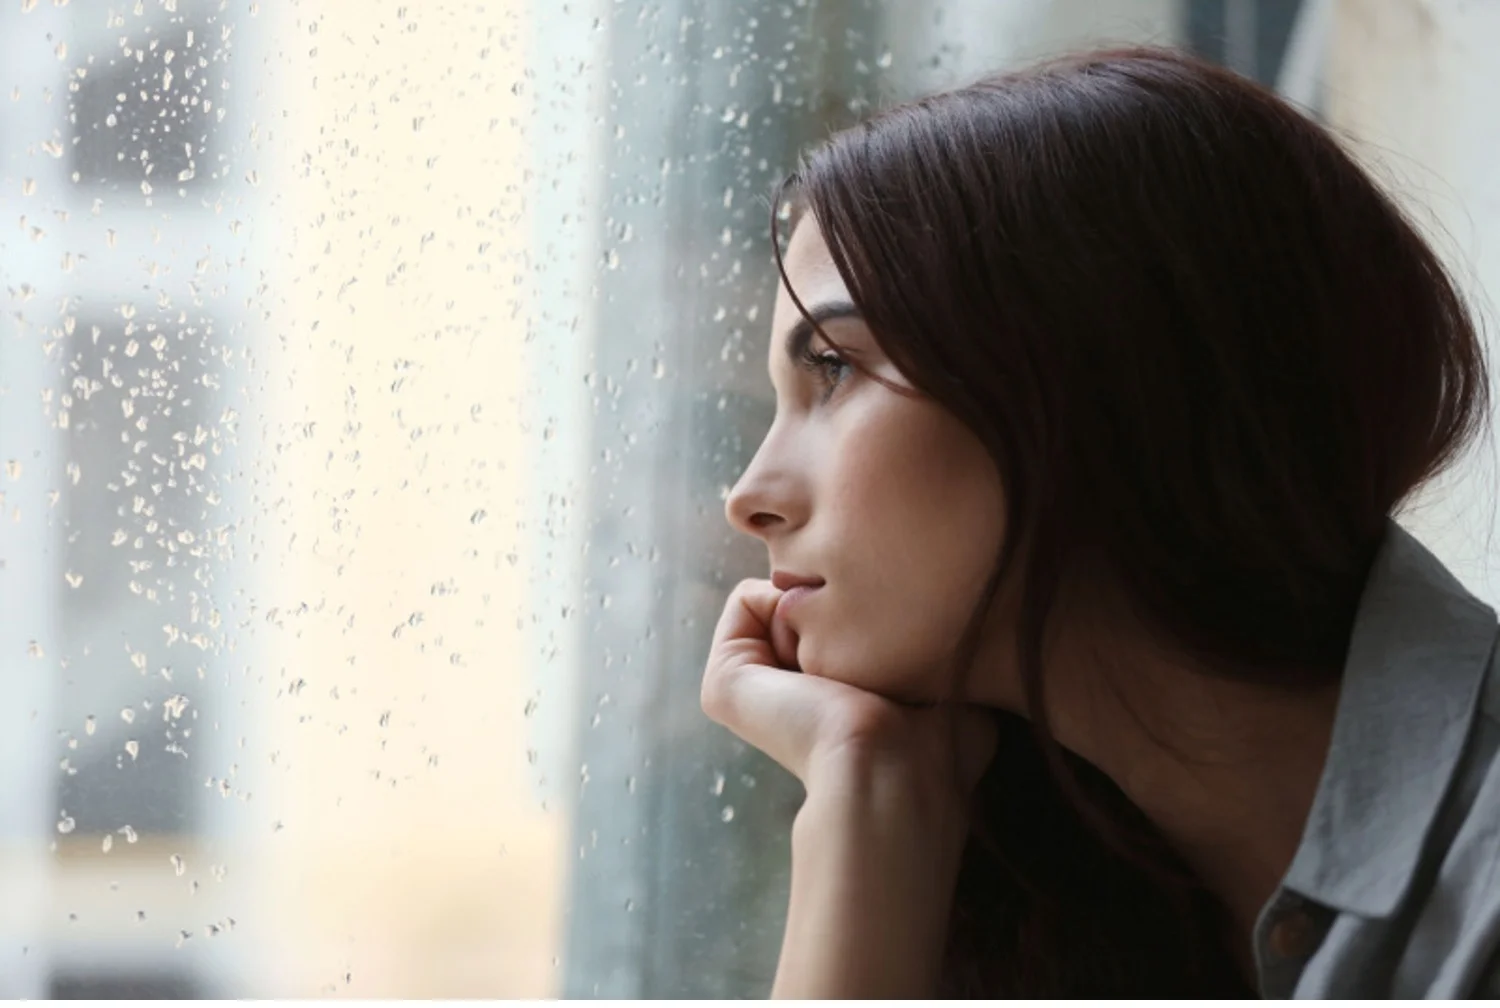 Young depressed woman looks out the window on a rainy day